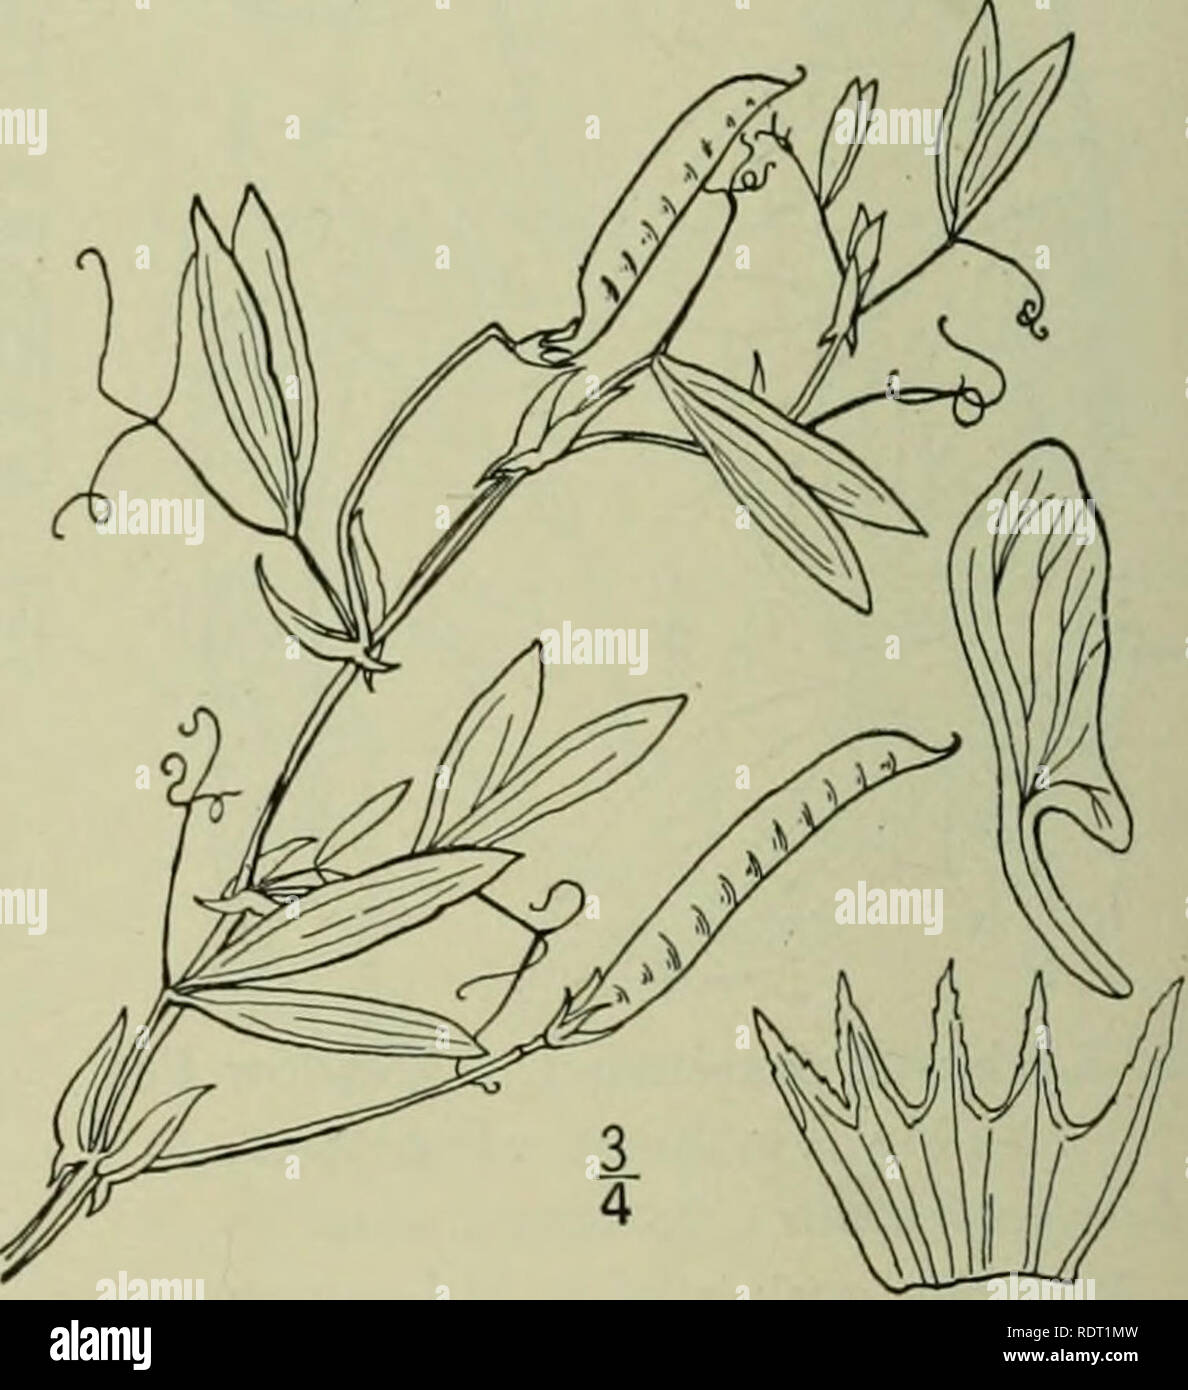 . An illustrated flora of the northern United States, Canada and the British possessions : from Newfoundland to the parallel of the southern boundary of Virginia and from the Atlantic Ocean westward to the 102nd meridian. Botany. 9. Lathyrus latifolius L. Everlasting Pea. Fig. 2632. Lathyrus latifolius L. Sp. PI. 733- i753- Perennial, glabrous; stems high-climbing, broadly winged, 3° long or more. Stipules lanceolate, acute, often l' long; petioles as long as the stipules or longer, winged like the stem; leaflets a single pair, oblong-lanceolate to elliptic, strongly veined, 2-4' long, acute o Stock Photo